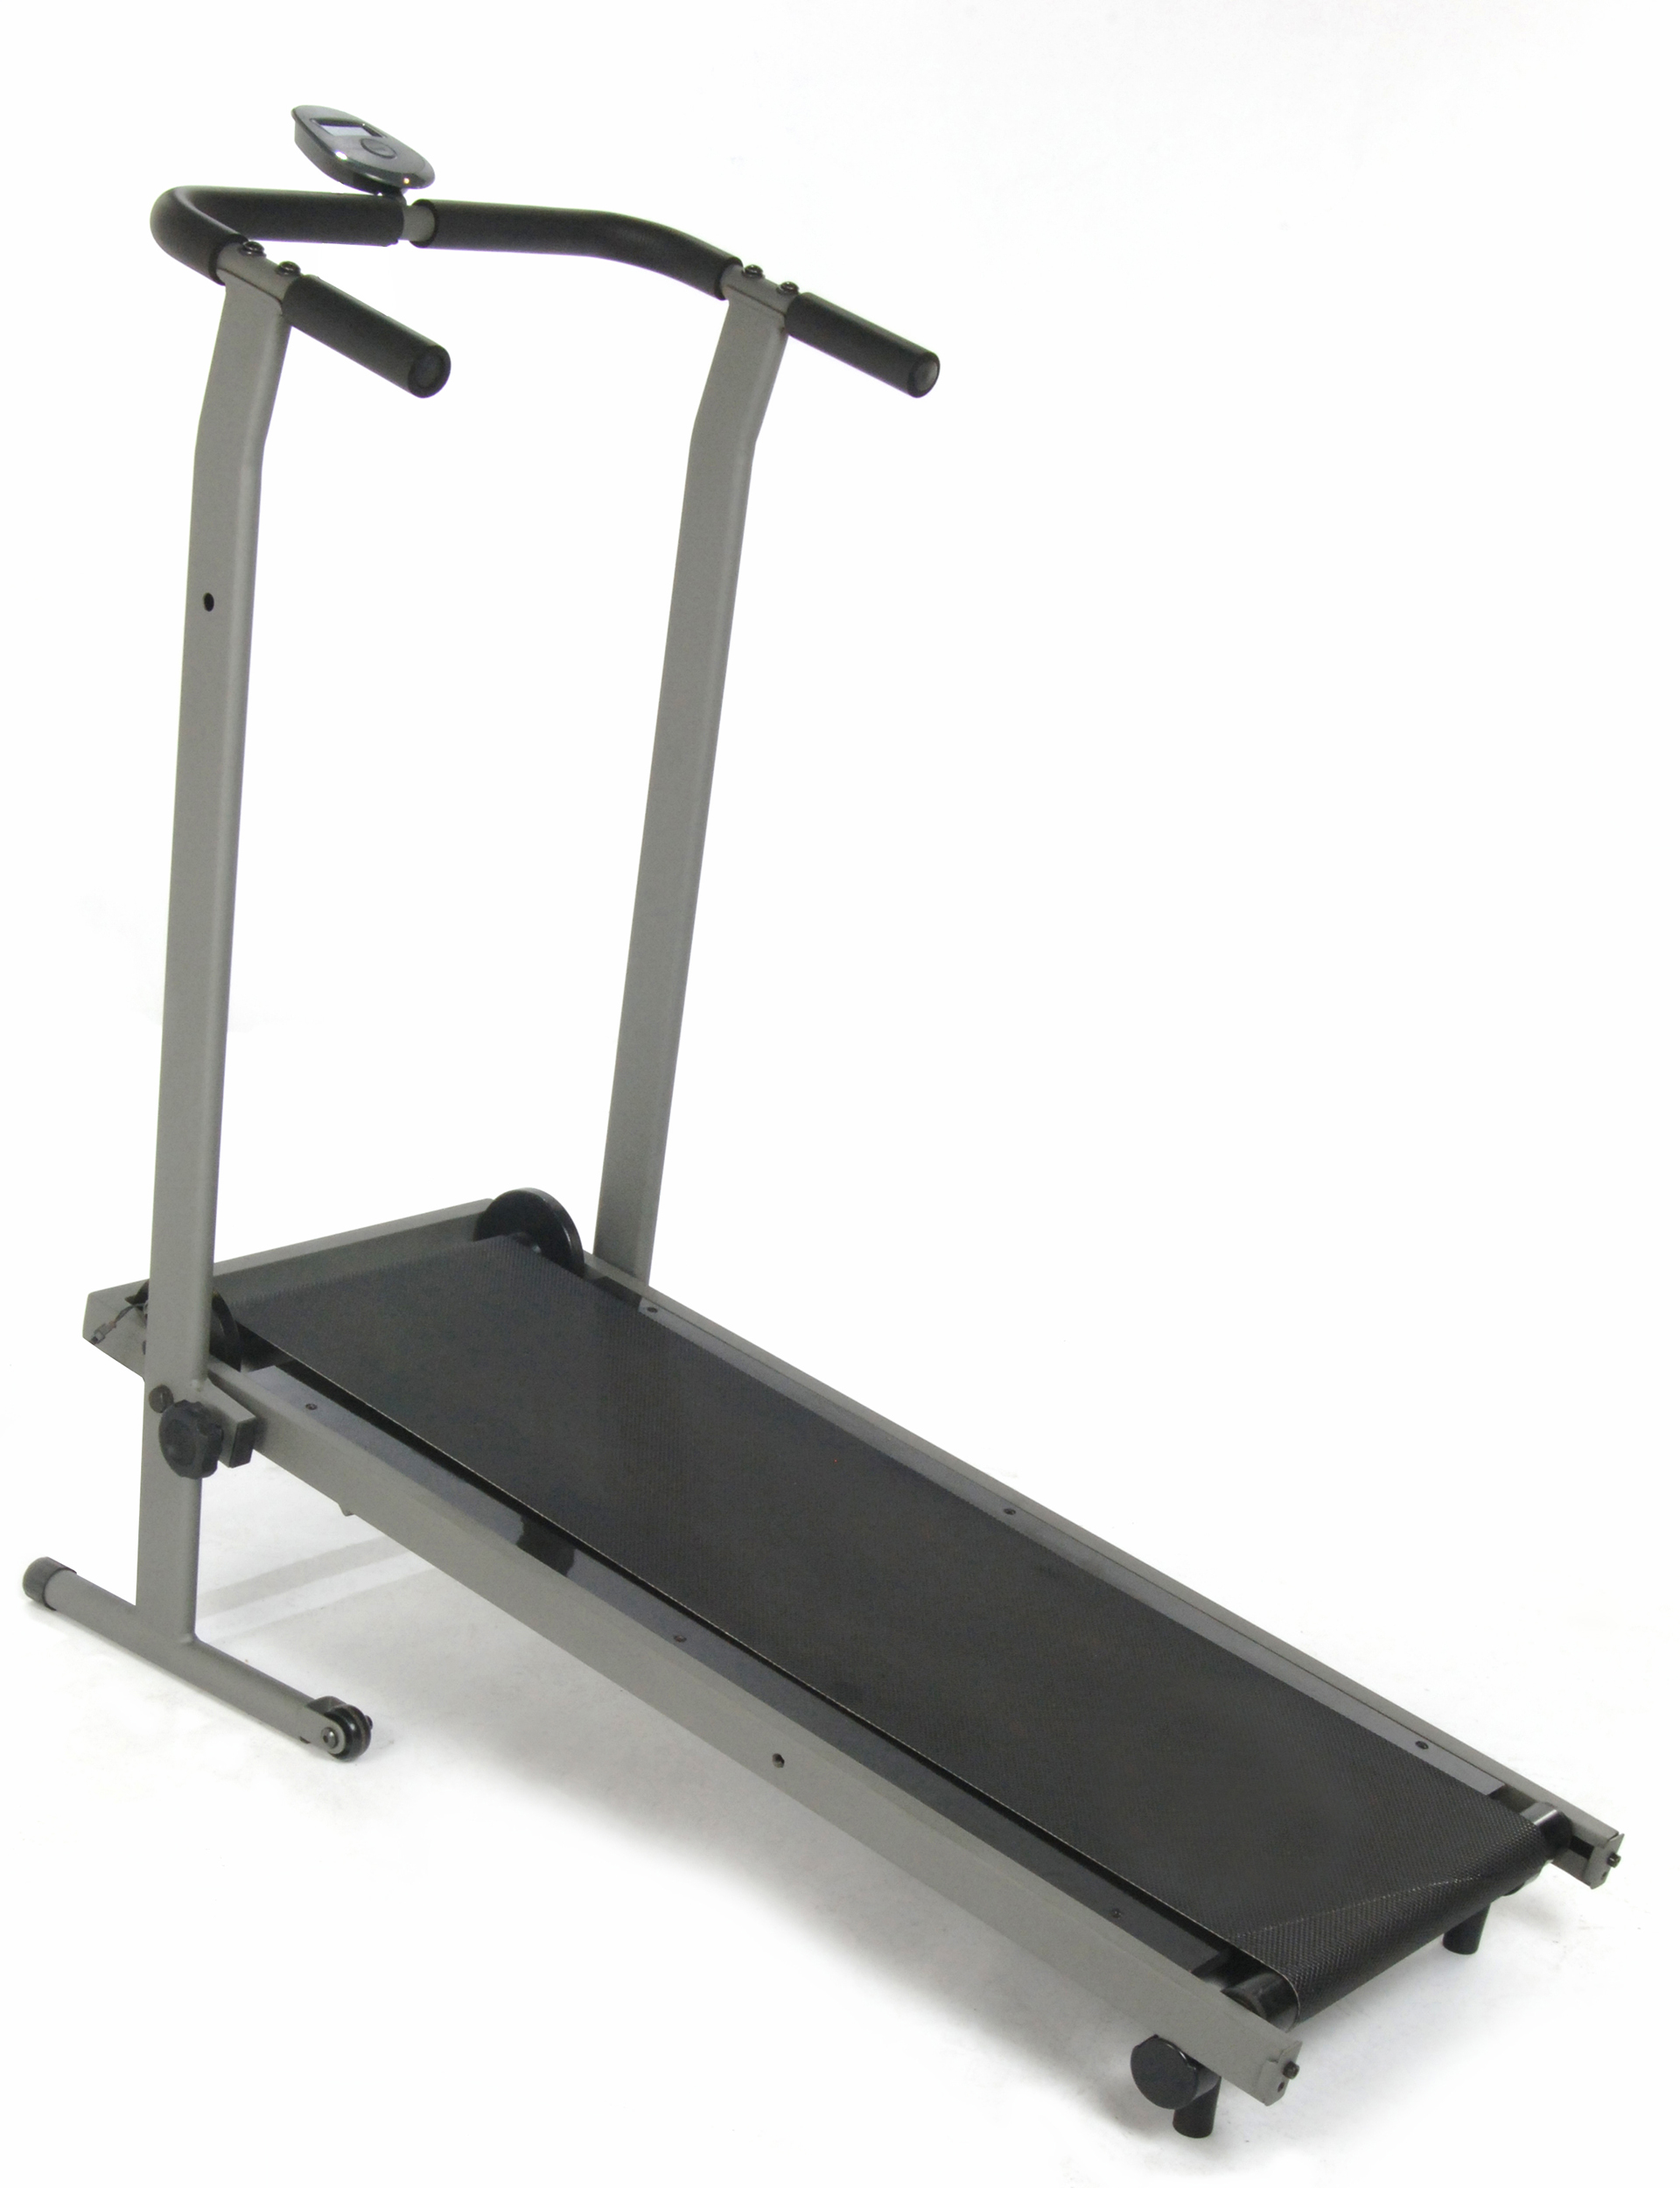 Stamina In-Motion Manual Treadmill - Home Fitness - Cardio - Weight Loss - Easy Storage - Run or Walk - image 1 of 6